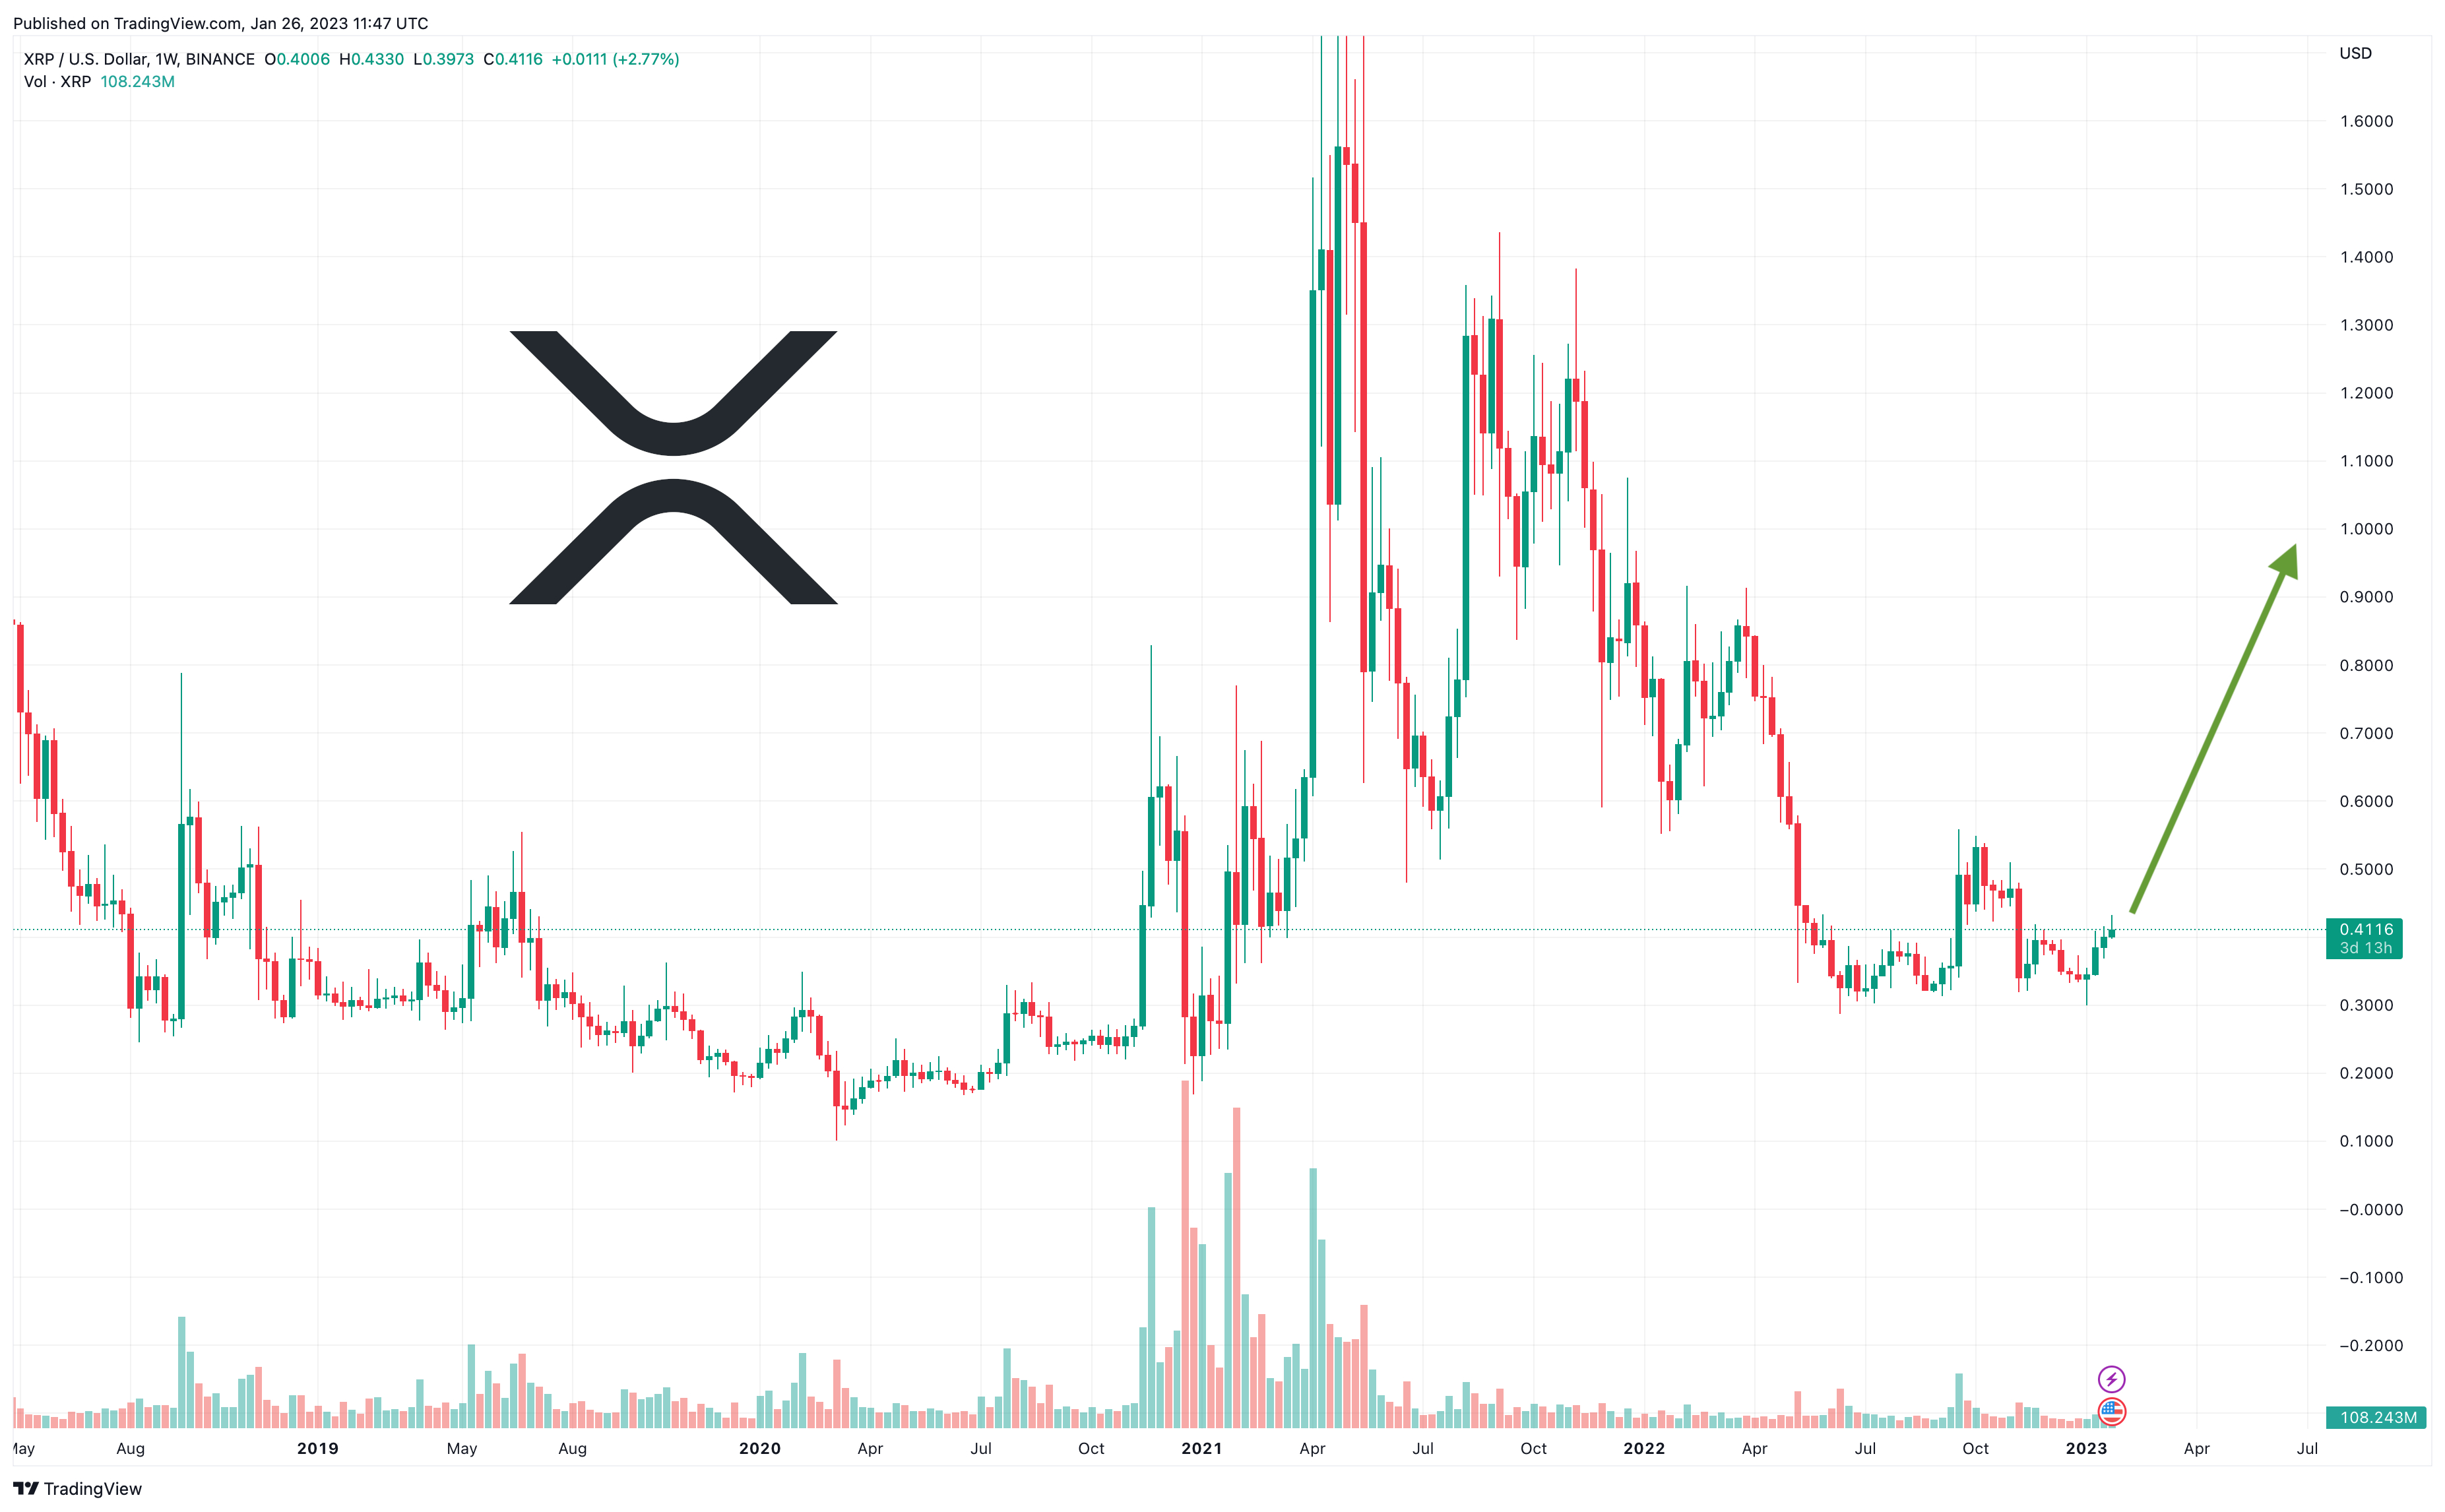 xrp price prediction as xrp breaks out of long term trading pattern 1 incoming